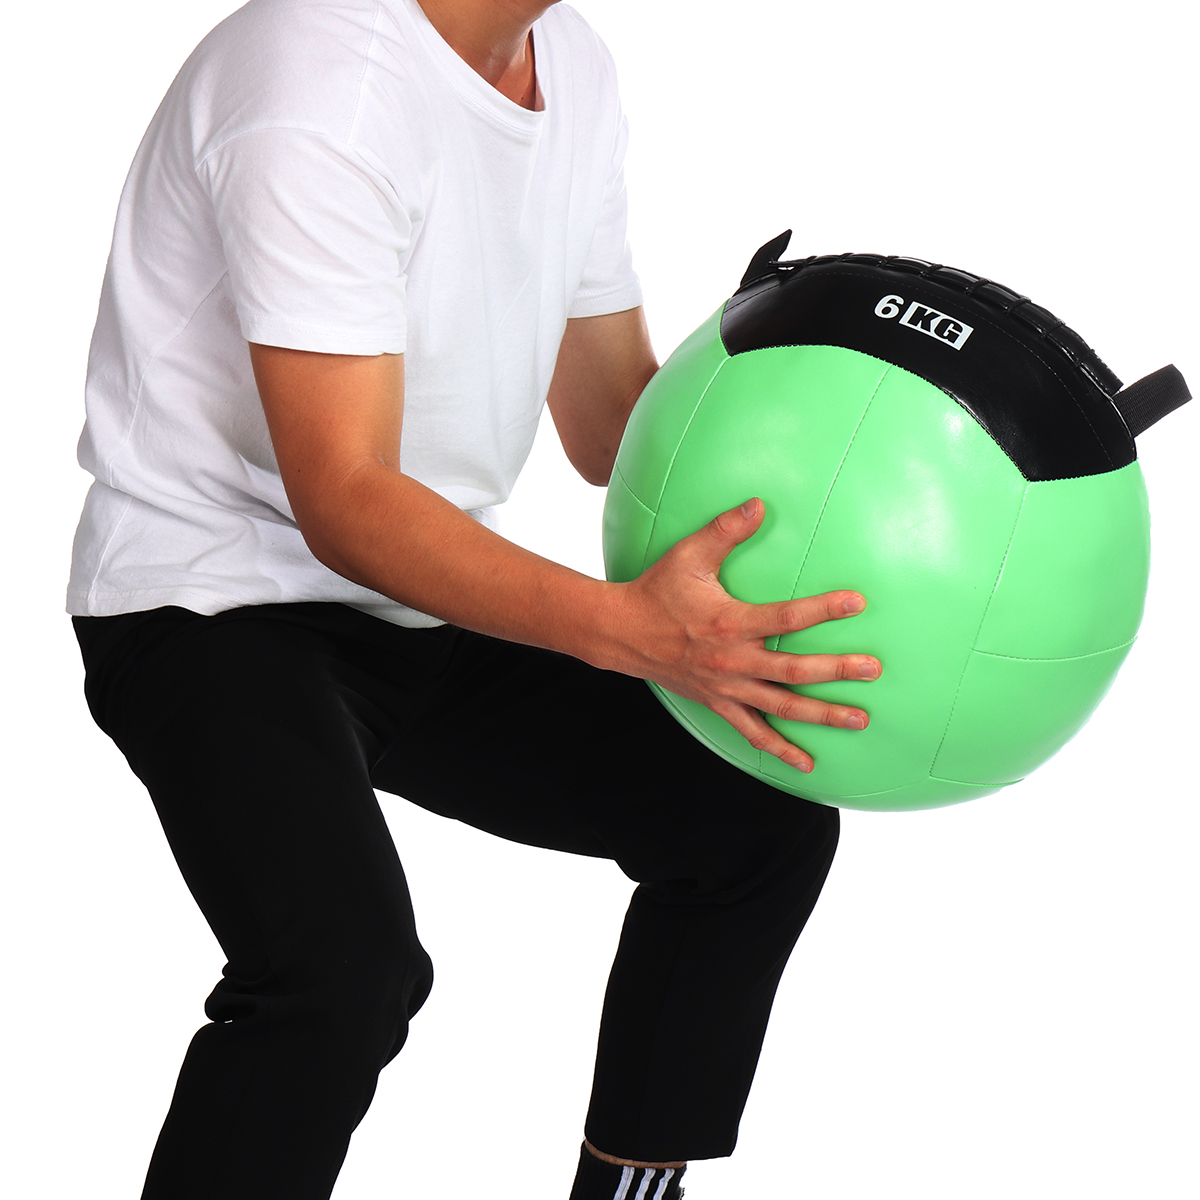 246KG-Weighted-Fitness-Balance-Ball-PU-Soft-Gym-Inelastic-Training-Exerciser-1748206-6